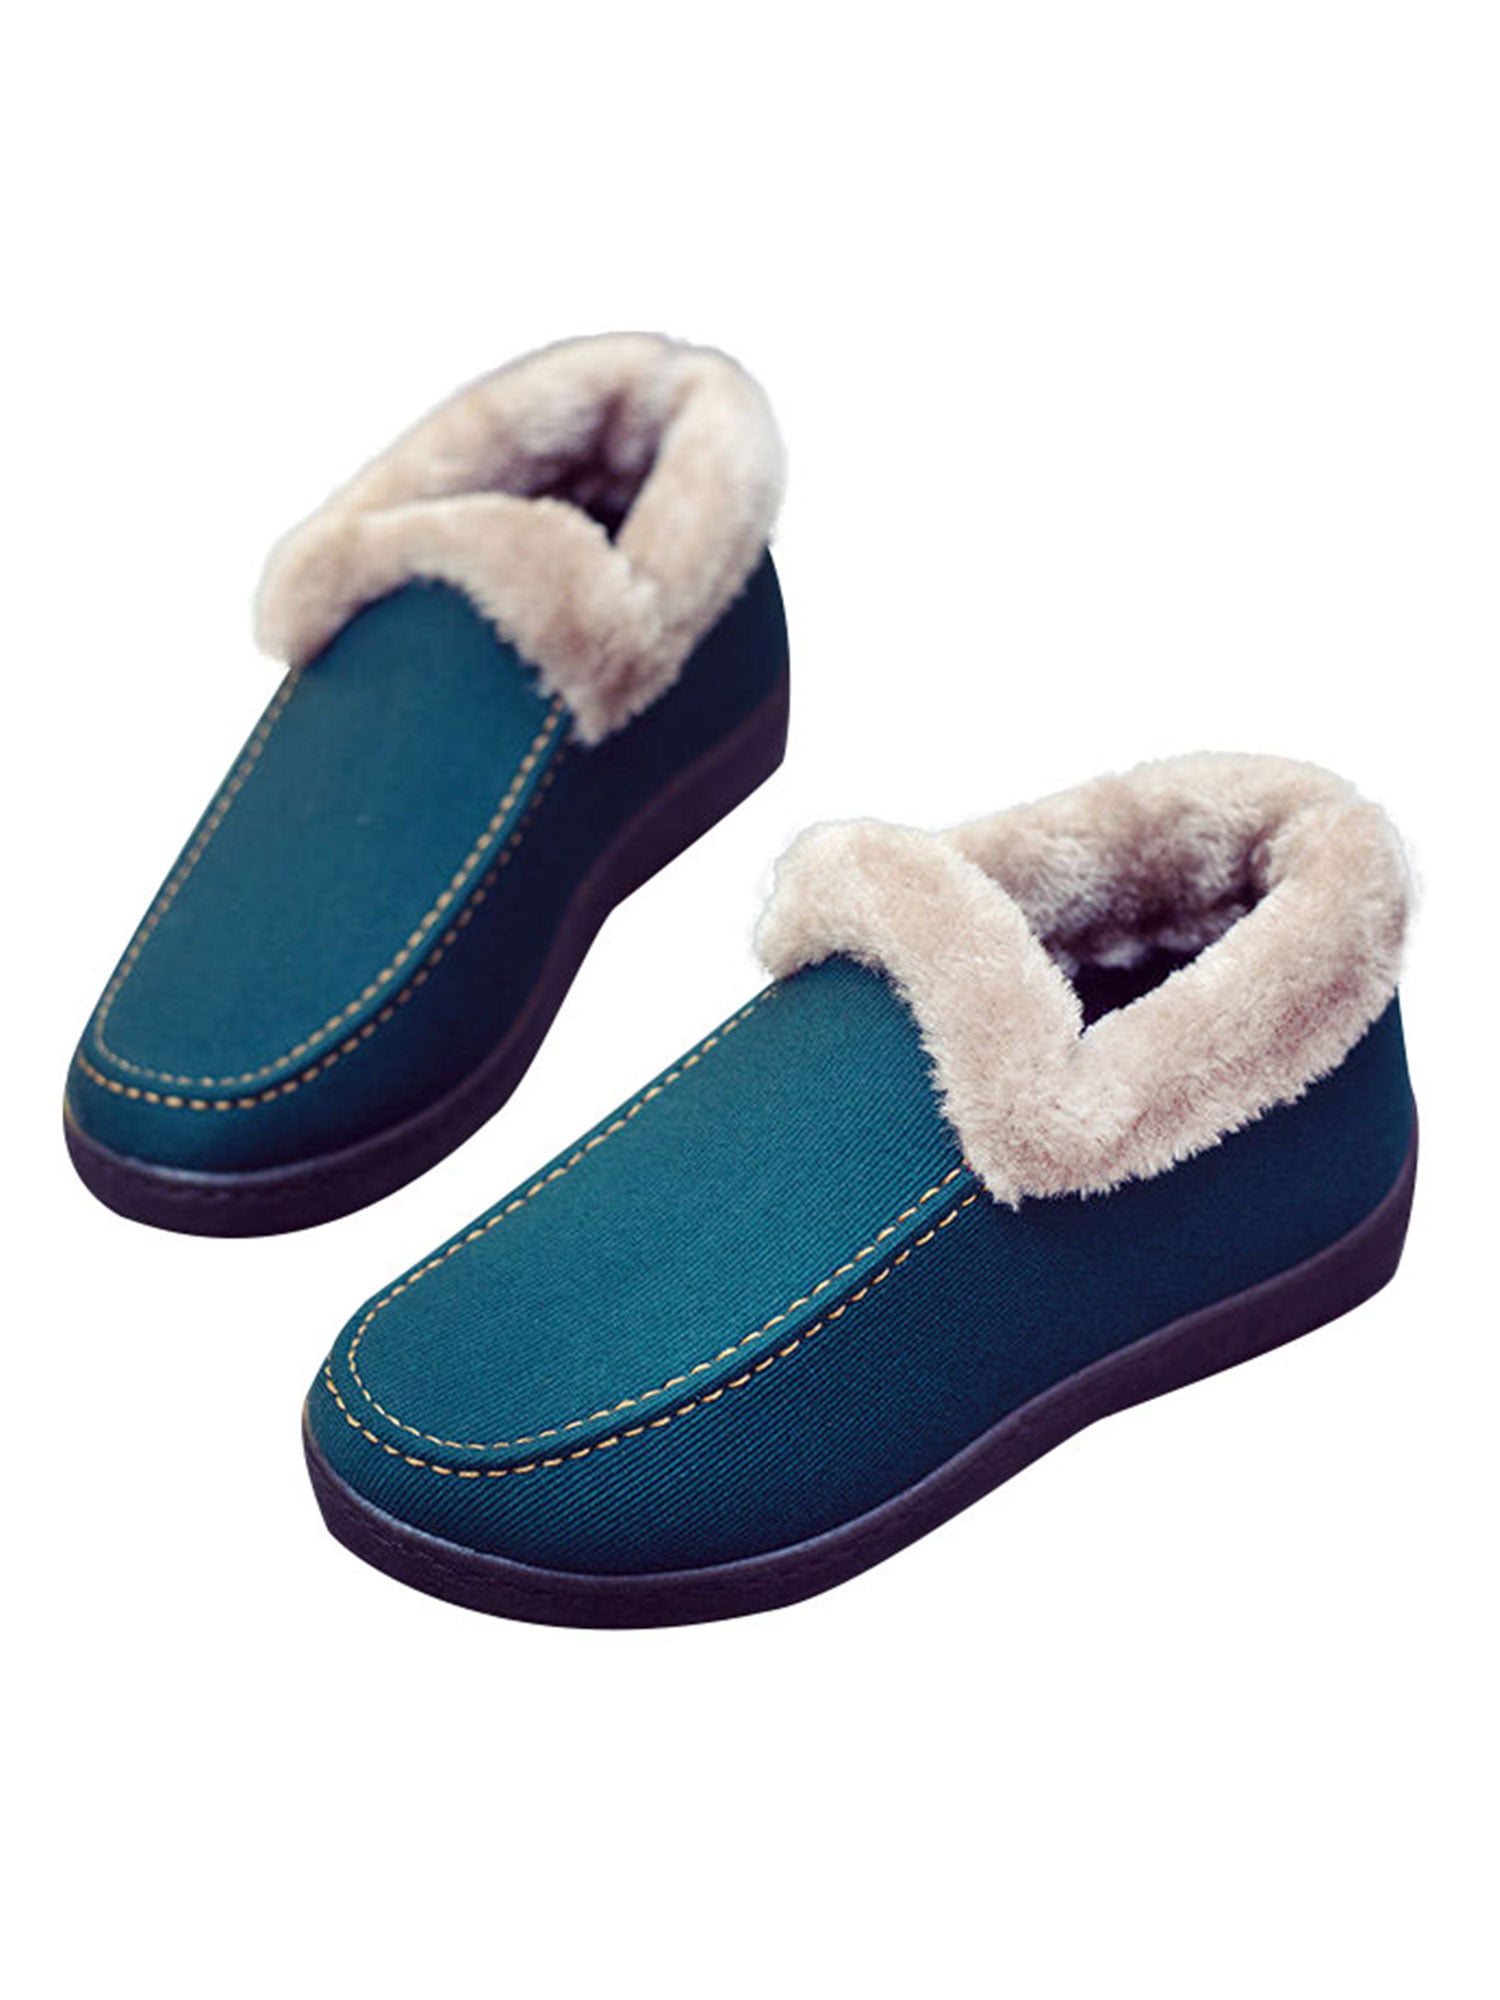 FANTURE Womens Slipper Micro Suede Faux Fur Lined Indoor & Outdoor Moccasins Slip On